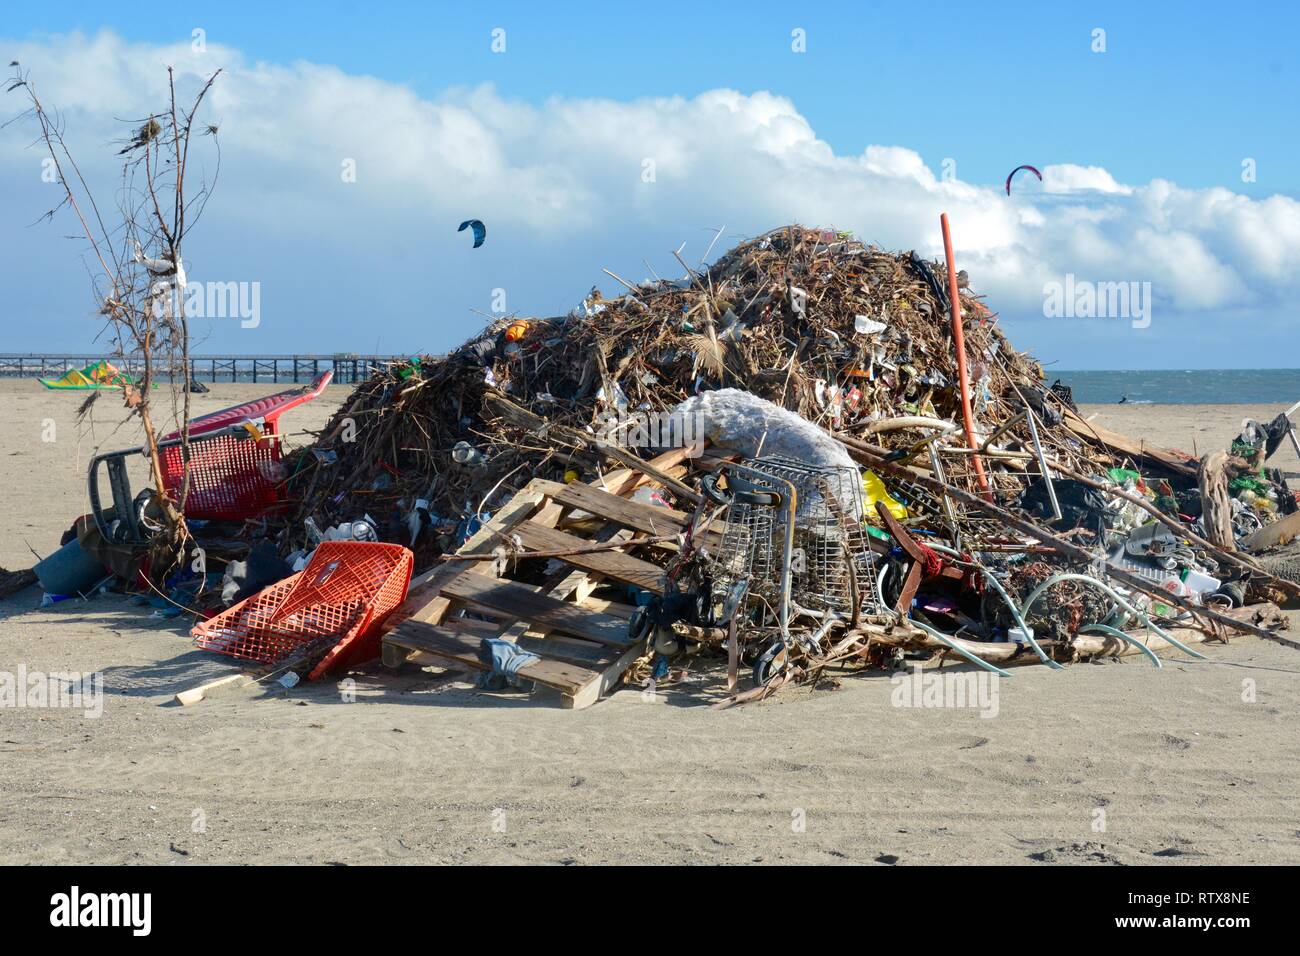 Seal Beach, CA / USA - February 17 2019: Aftermath of storms. Debris includes shopping carts washed up on beach at the mouth of the San Gabriel River. Stock Photo